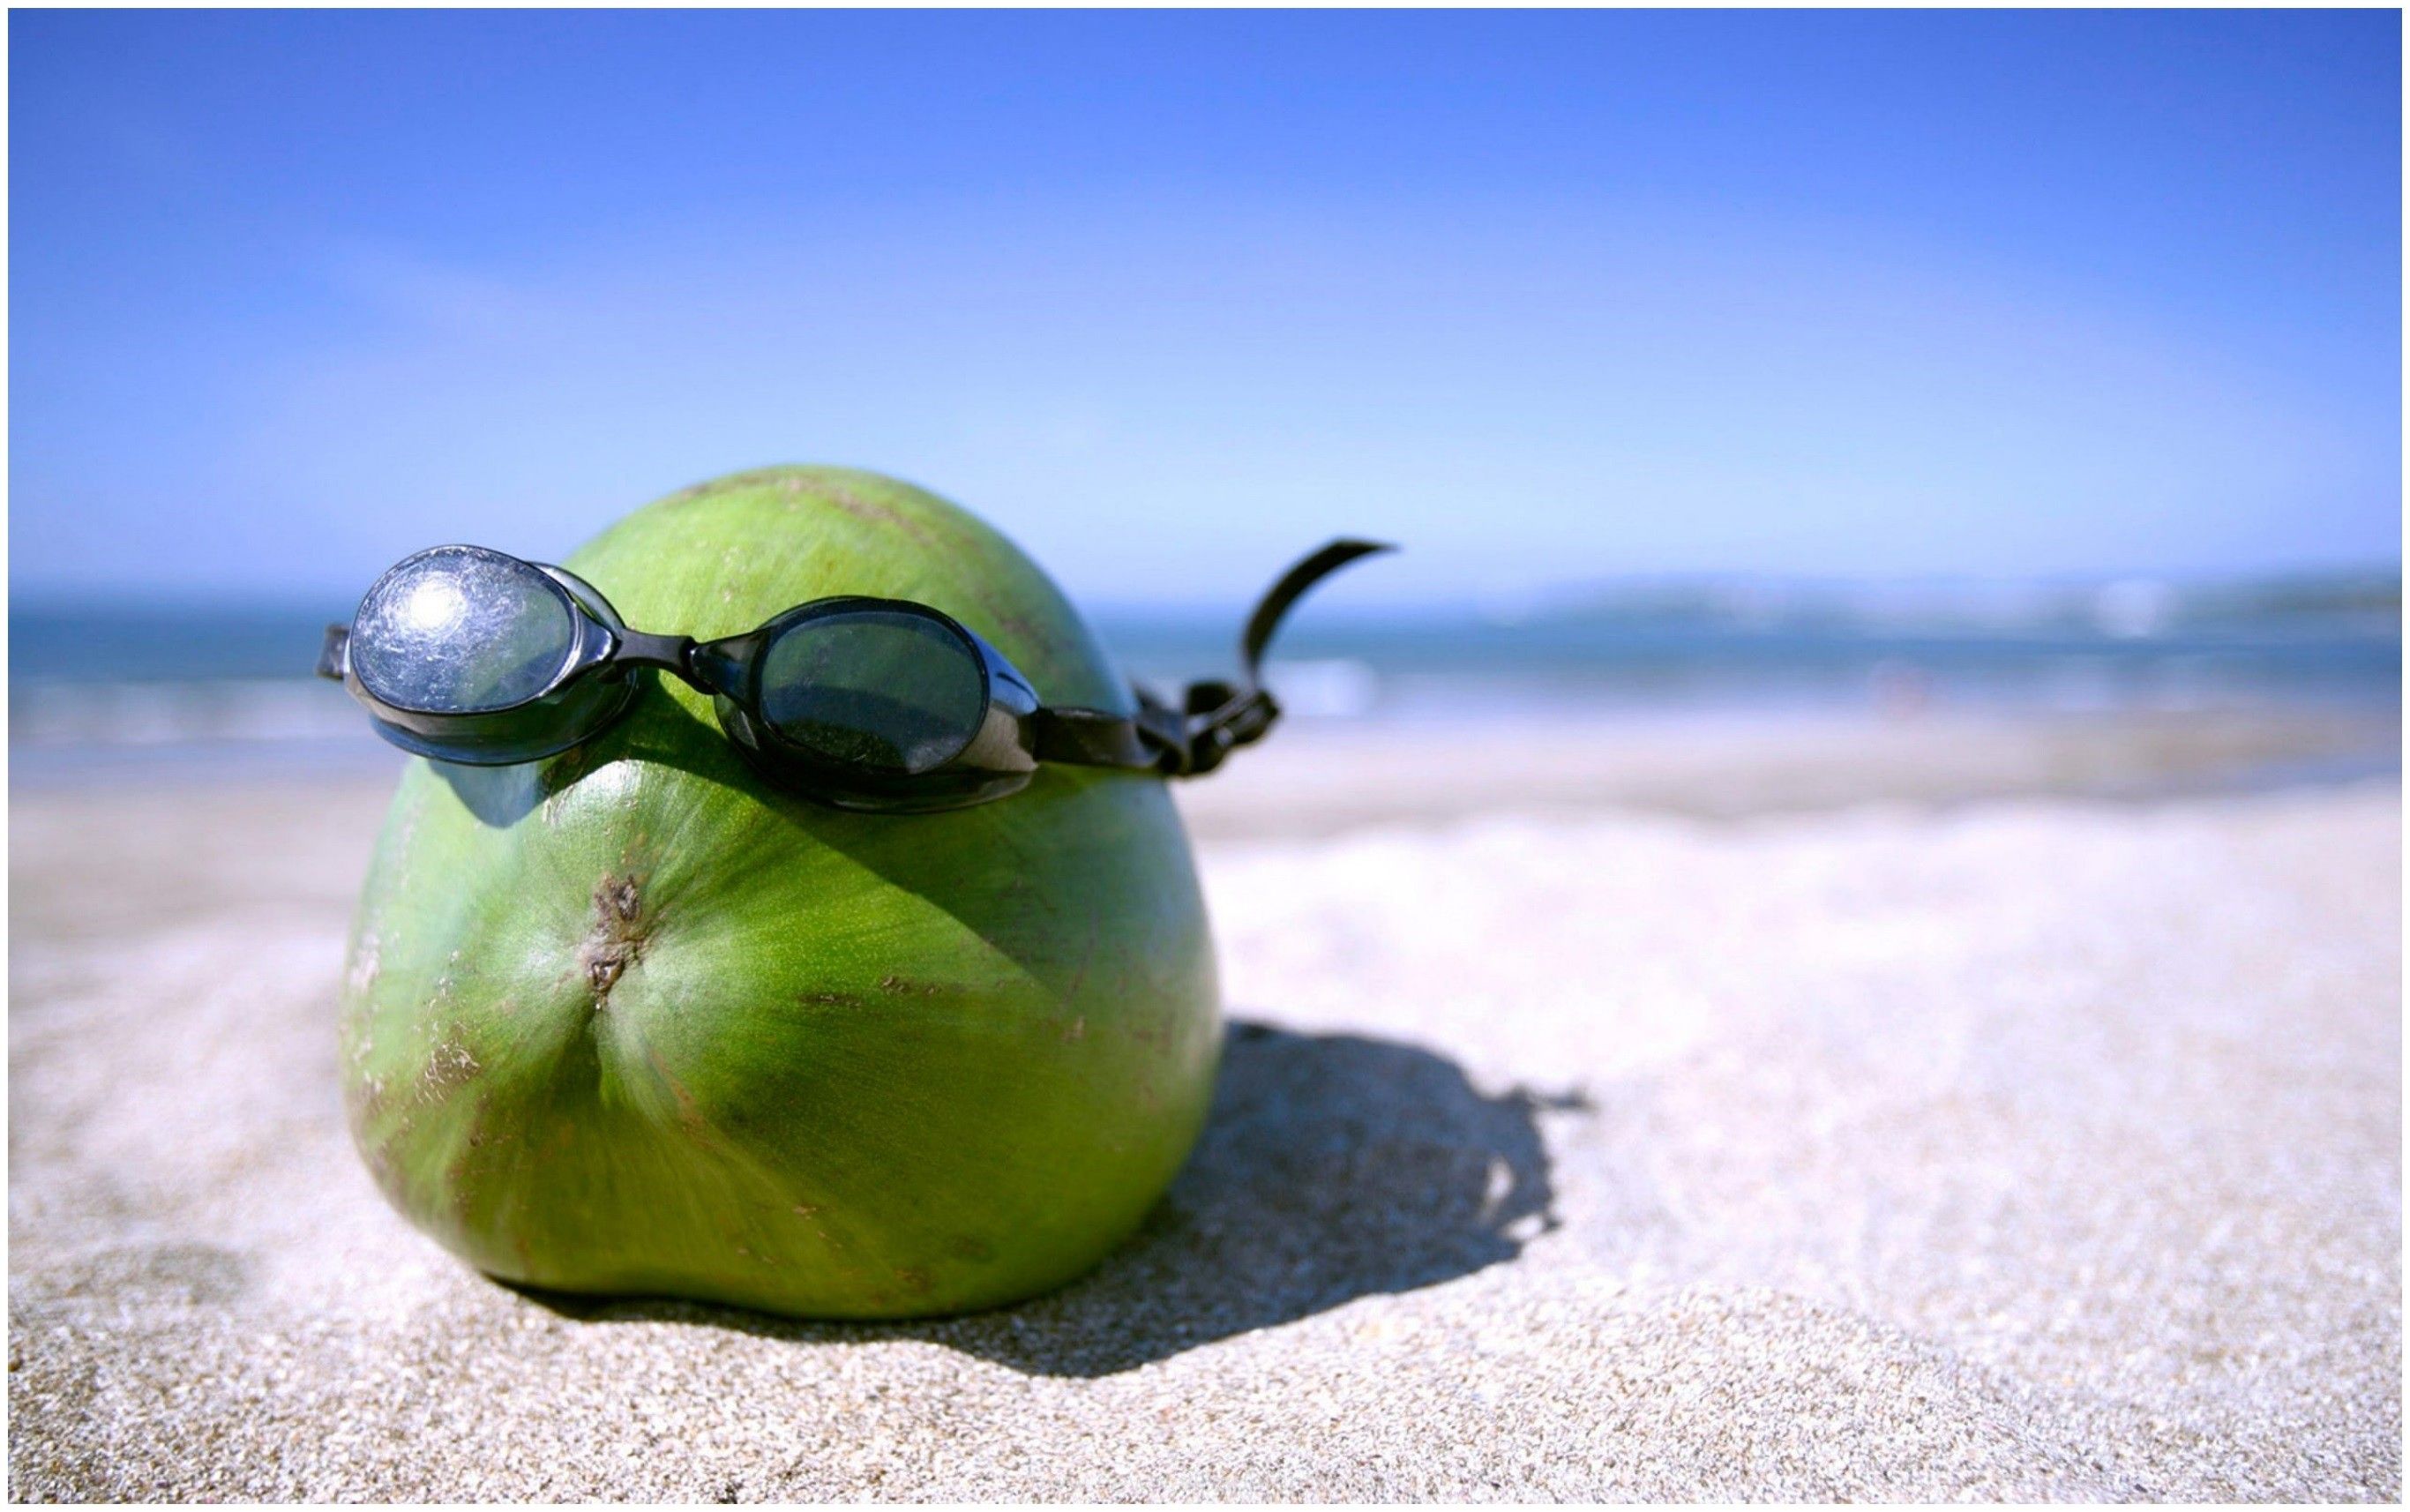 A coconut wearing sunglasses on a beach. - Coconut